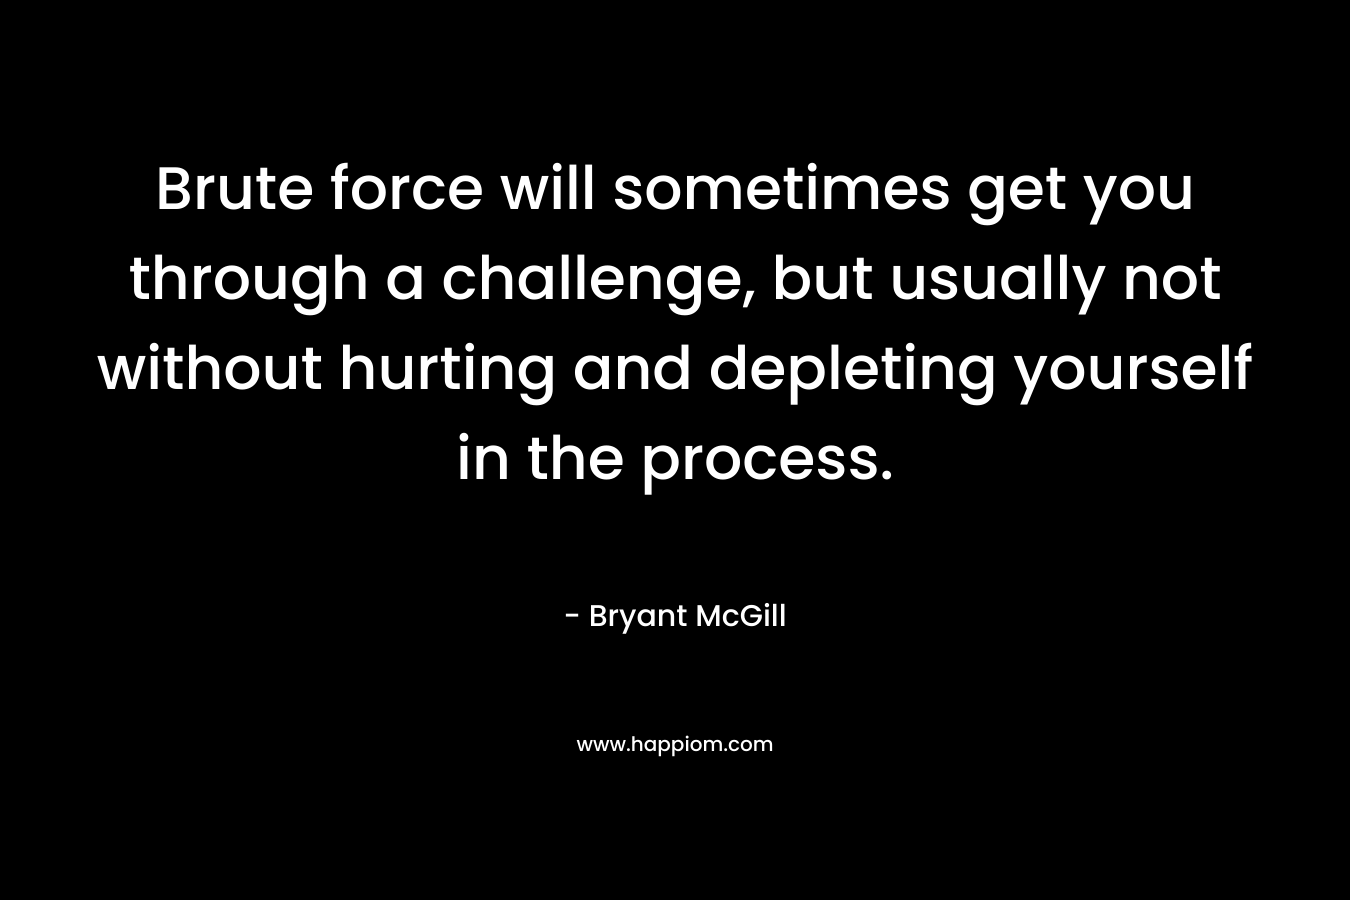 Brute force will sometimes get you through a challenge, but usually not without hurting and depleting yourself in the process. – Bryant McGill